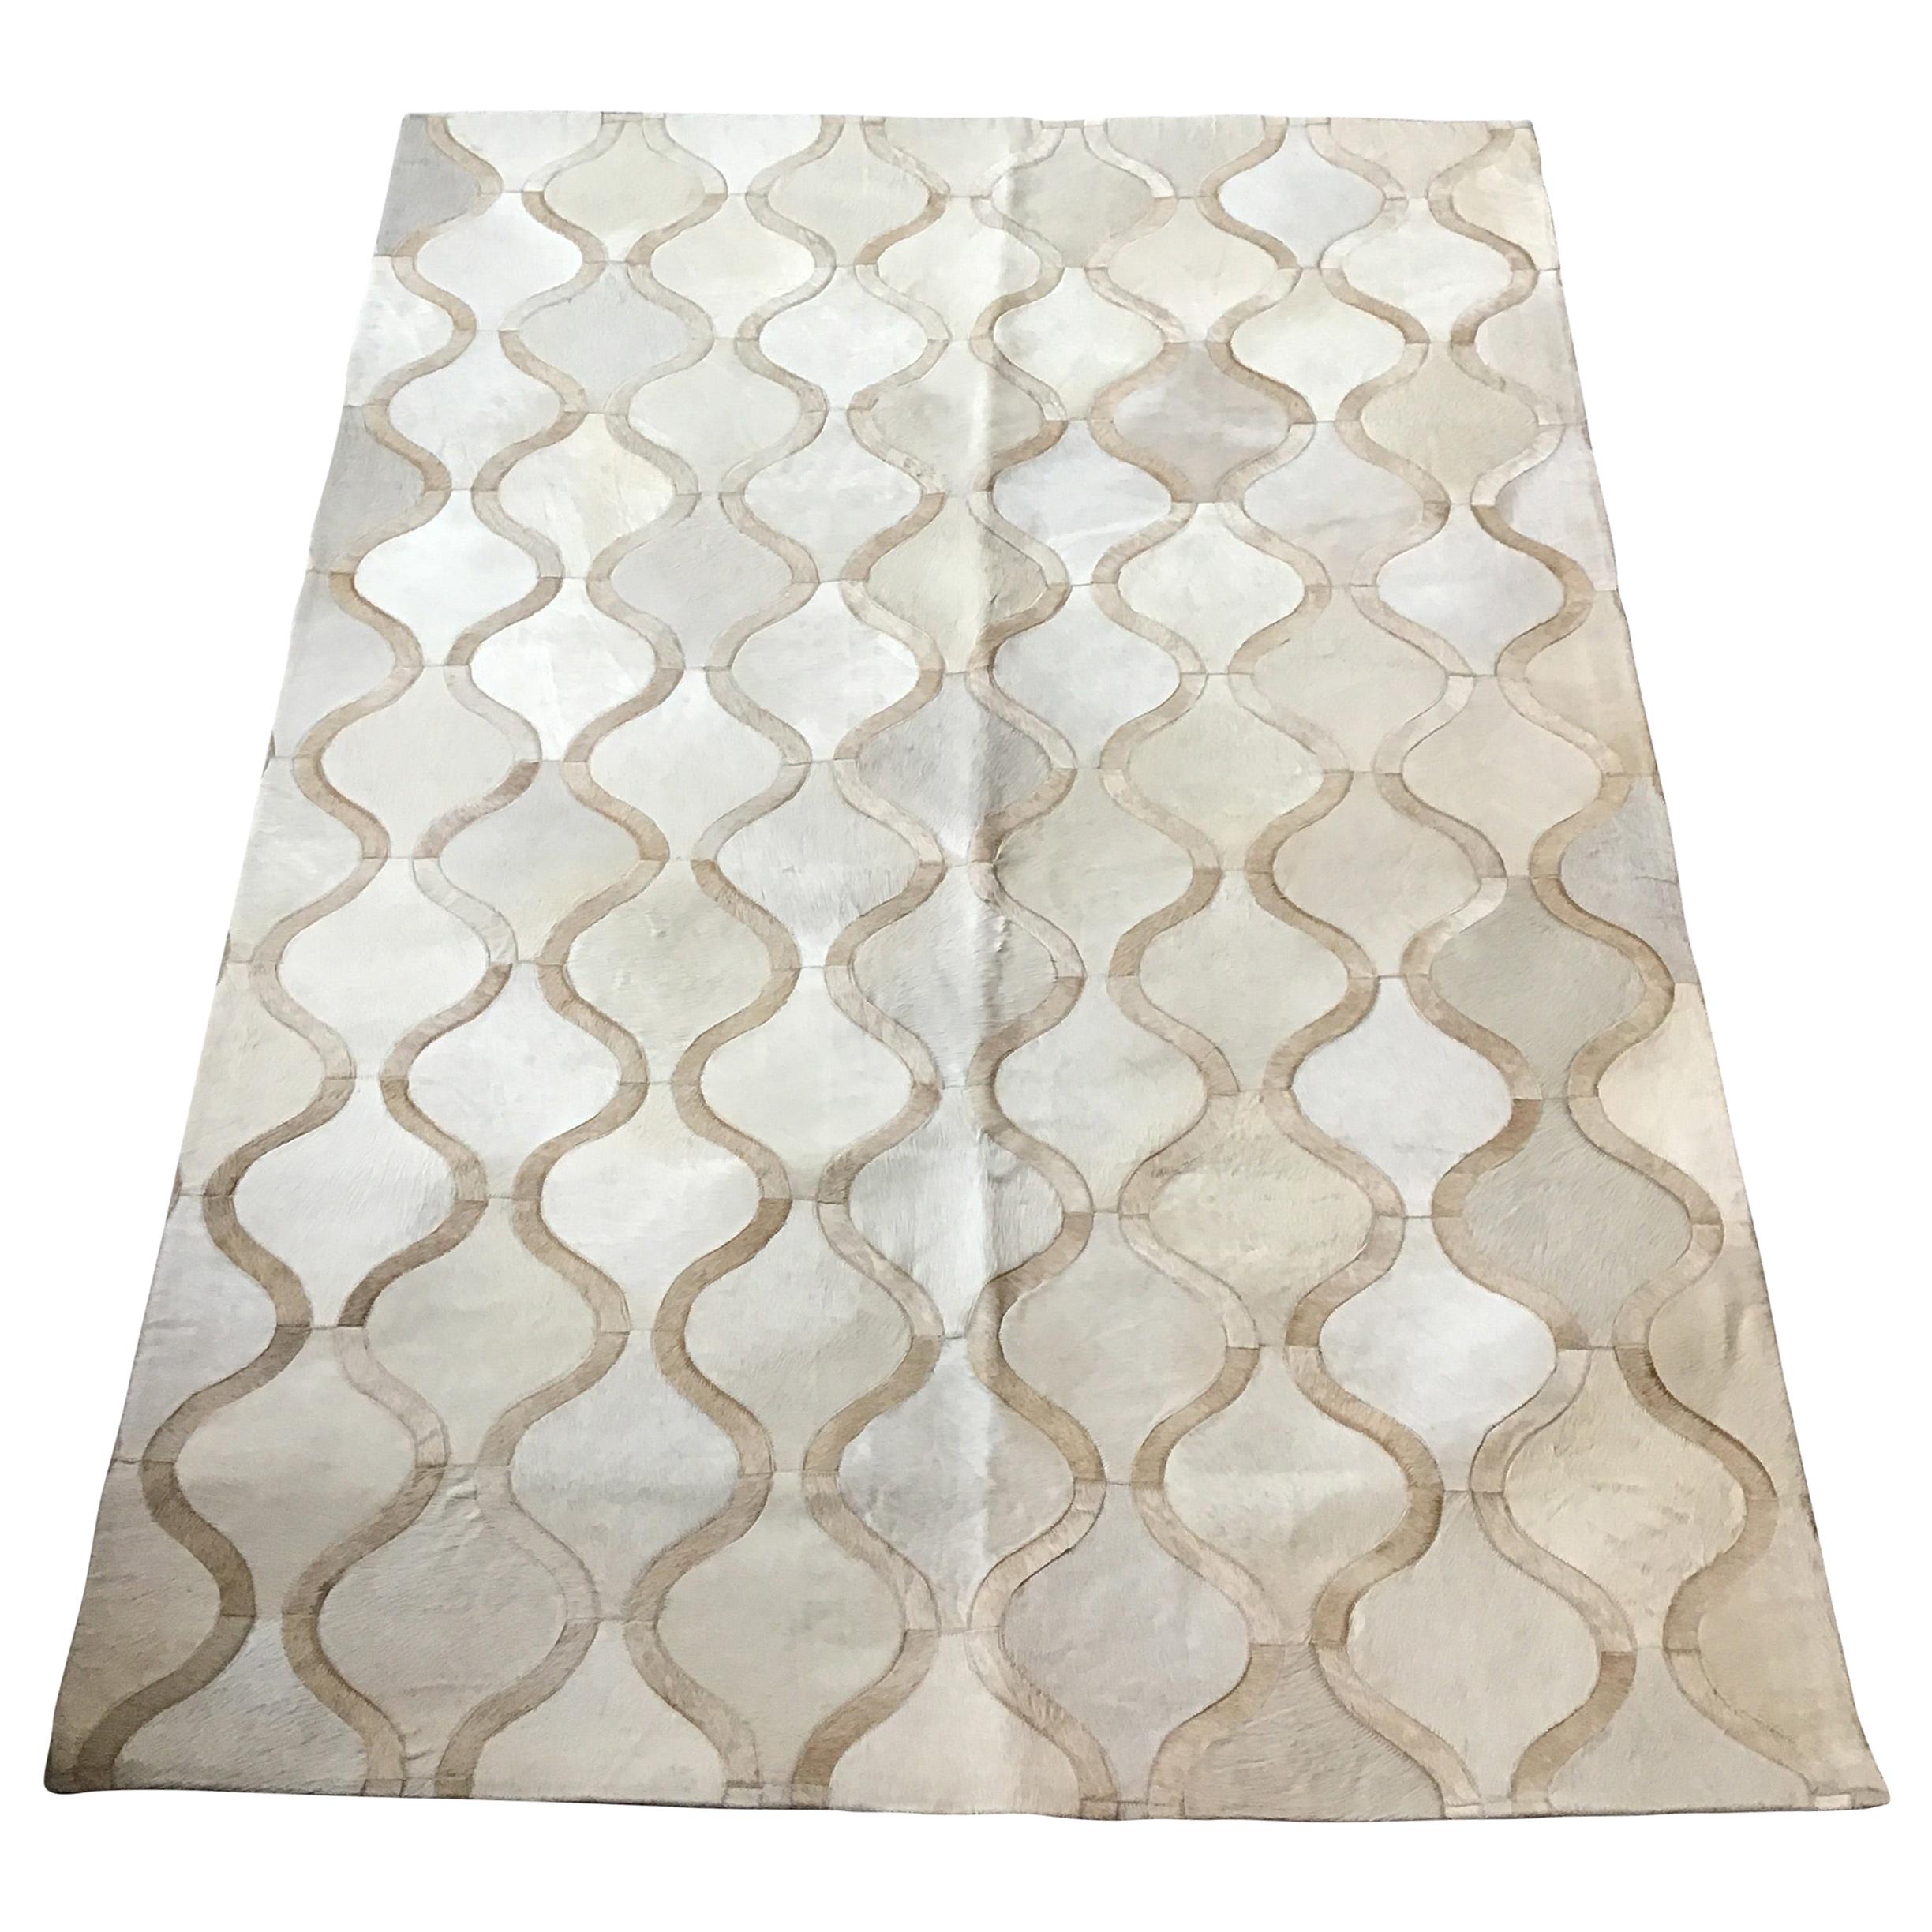 Castelluxe 5 x 8 Horizon Design Cream Colored Hair On Hide Rug For Sale